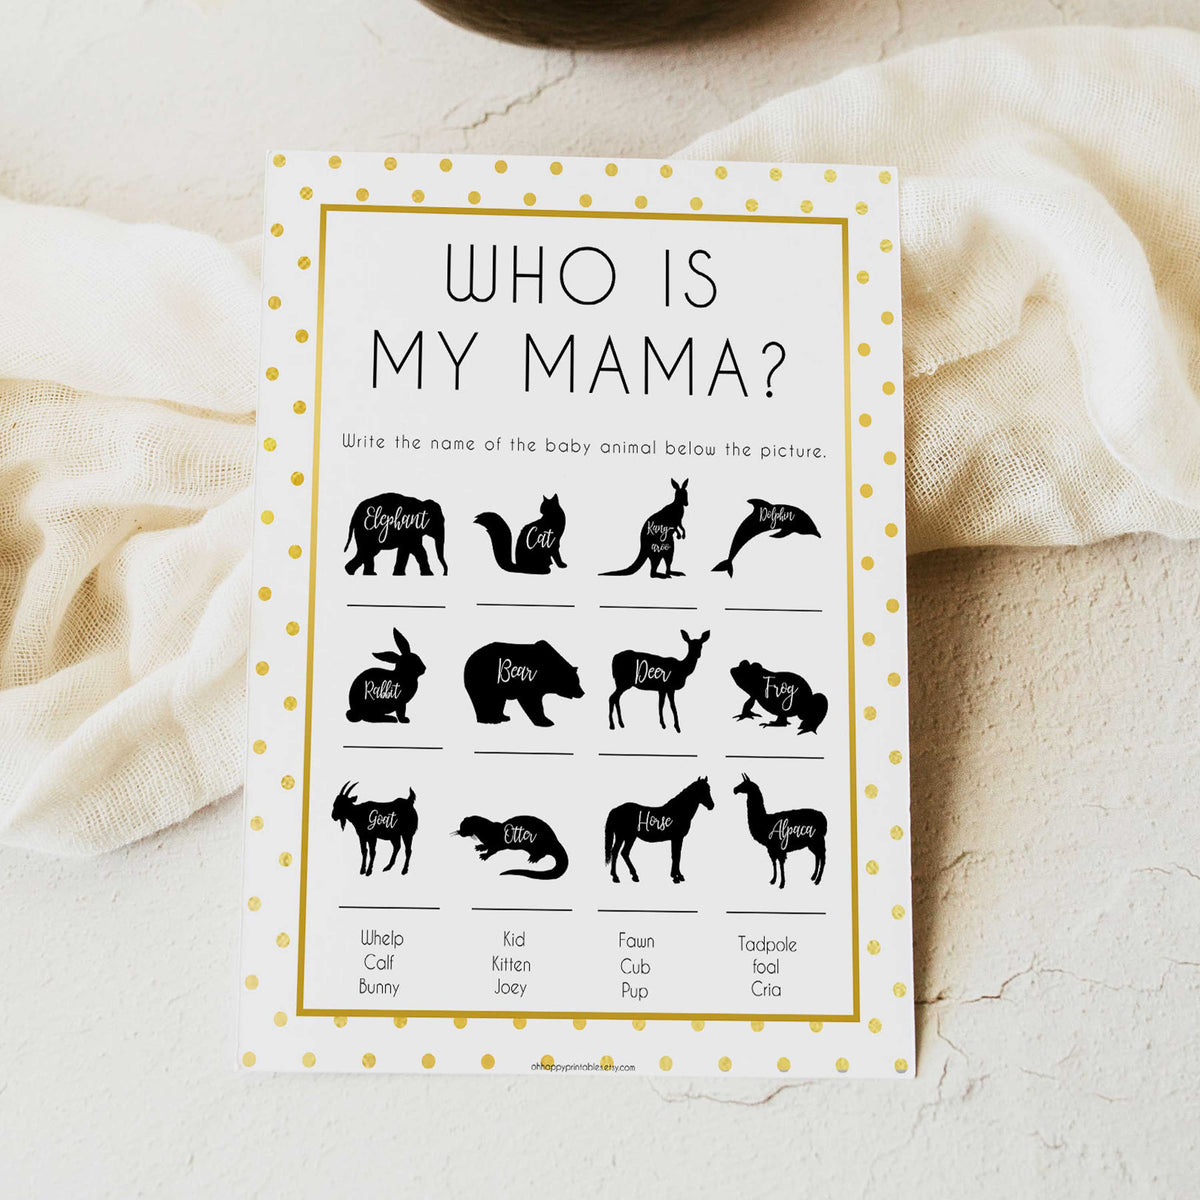 who is my mama game, baby animal game, Printable baby shower games, baby gold dots fun baby games, baby shower games, fun baby shower ideas, top baby shower ideas, gold glitter shower baby shower, friends baby shower ideas